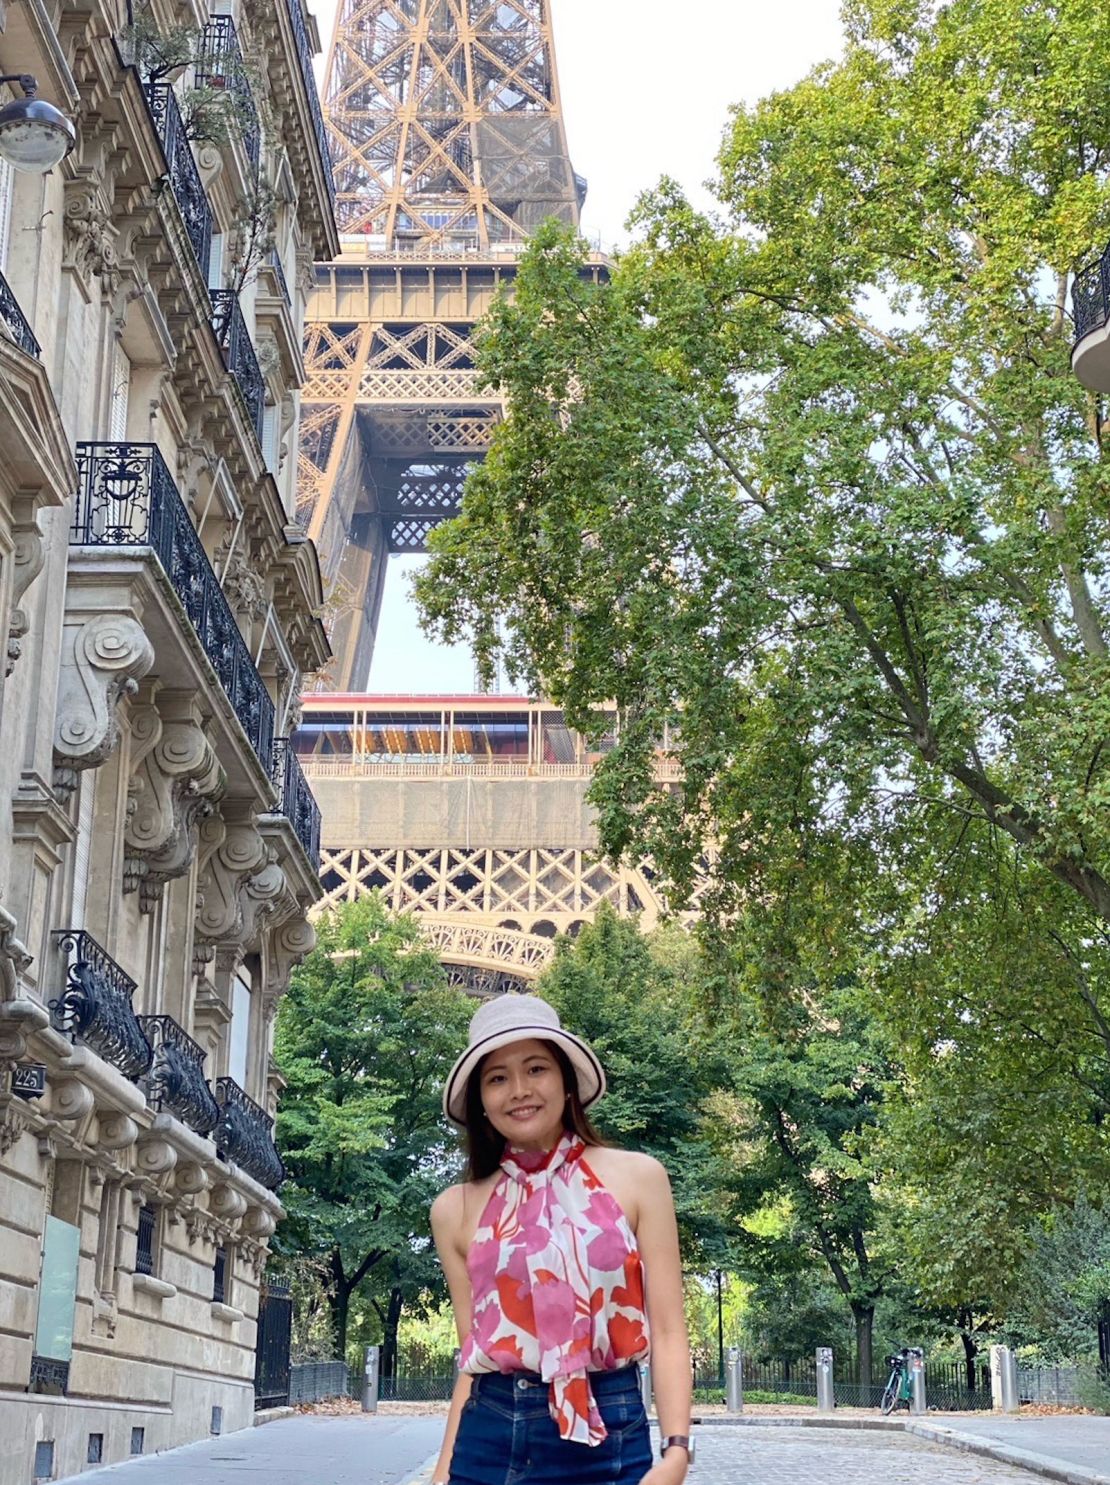 Yuma Kase says that she enjoys exploring the world. She's pictured here on a visit to Paris.